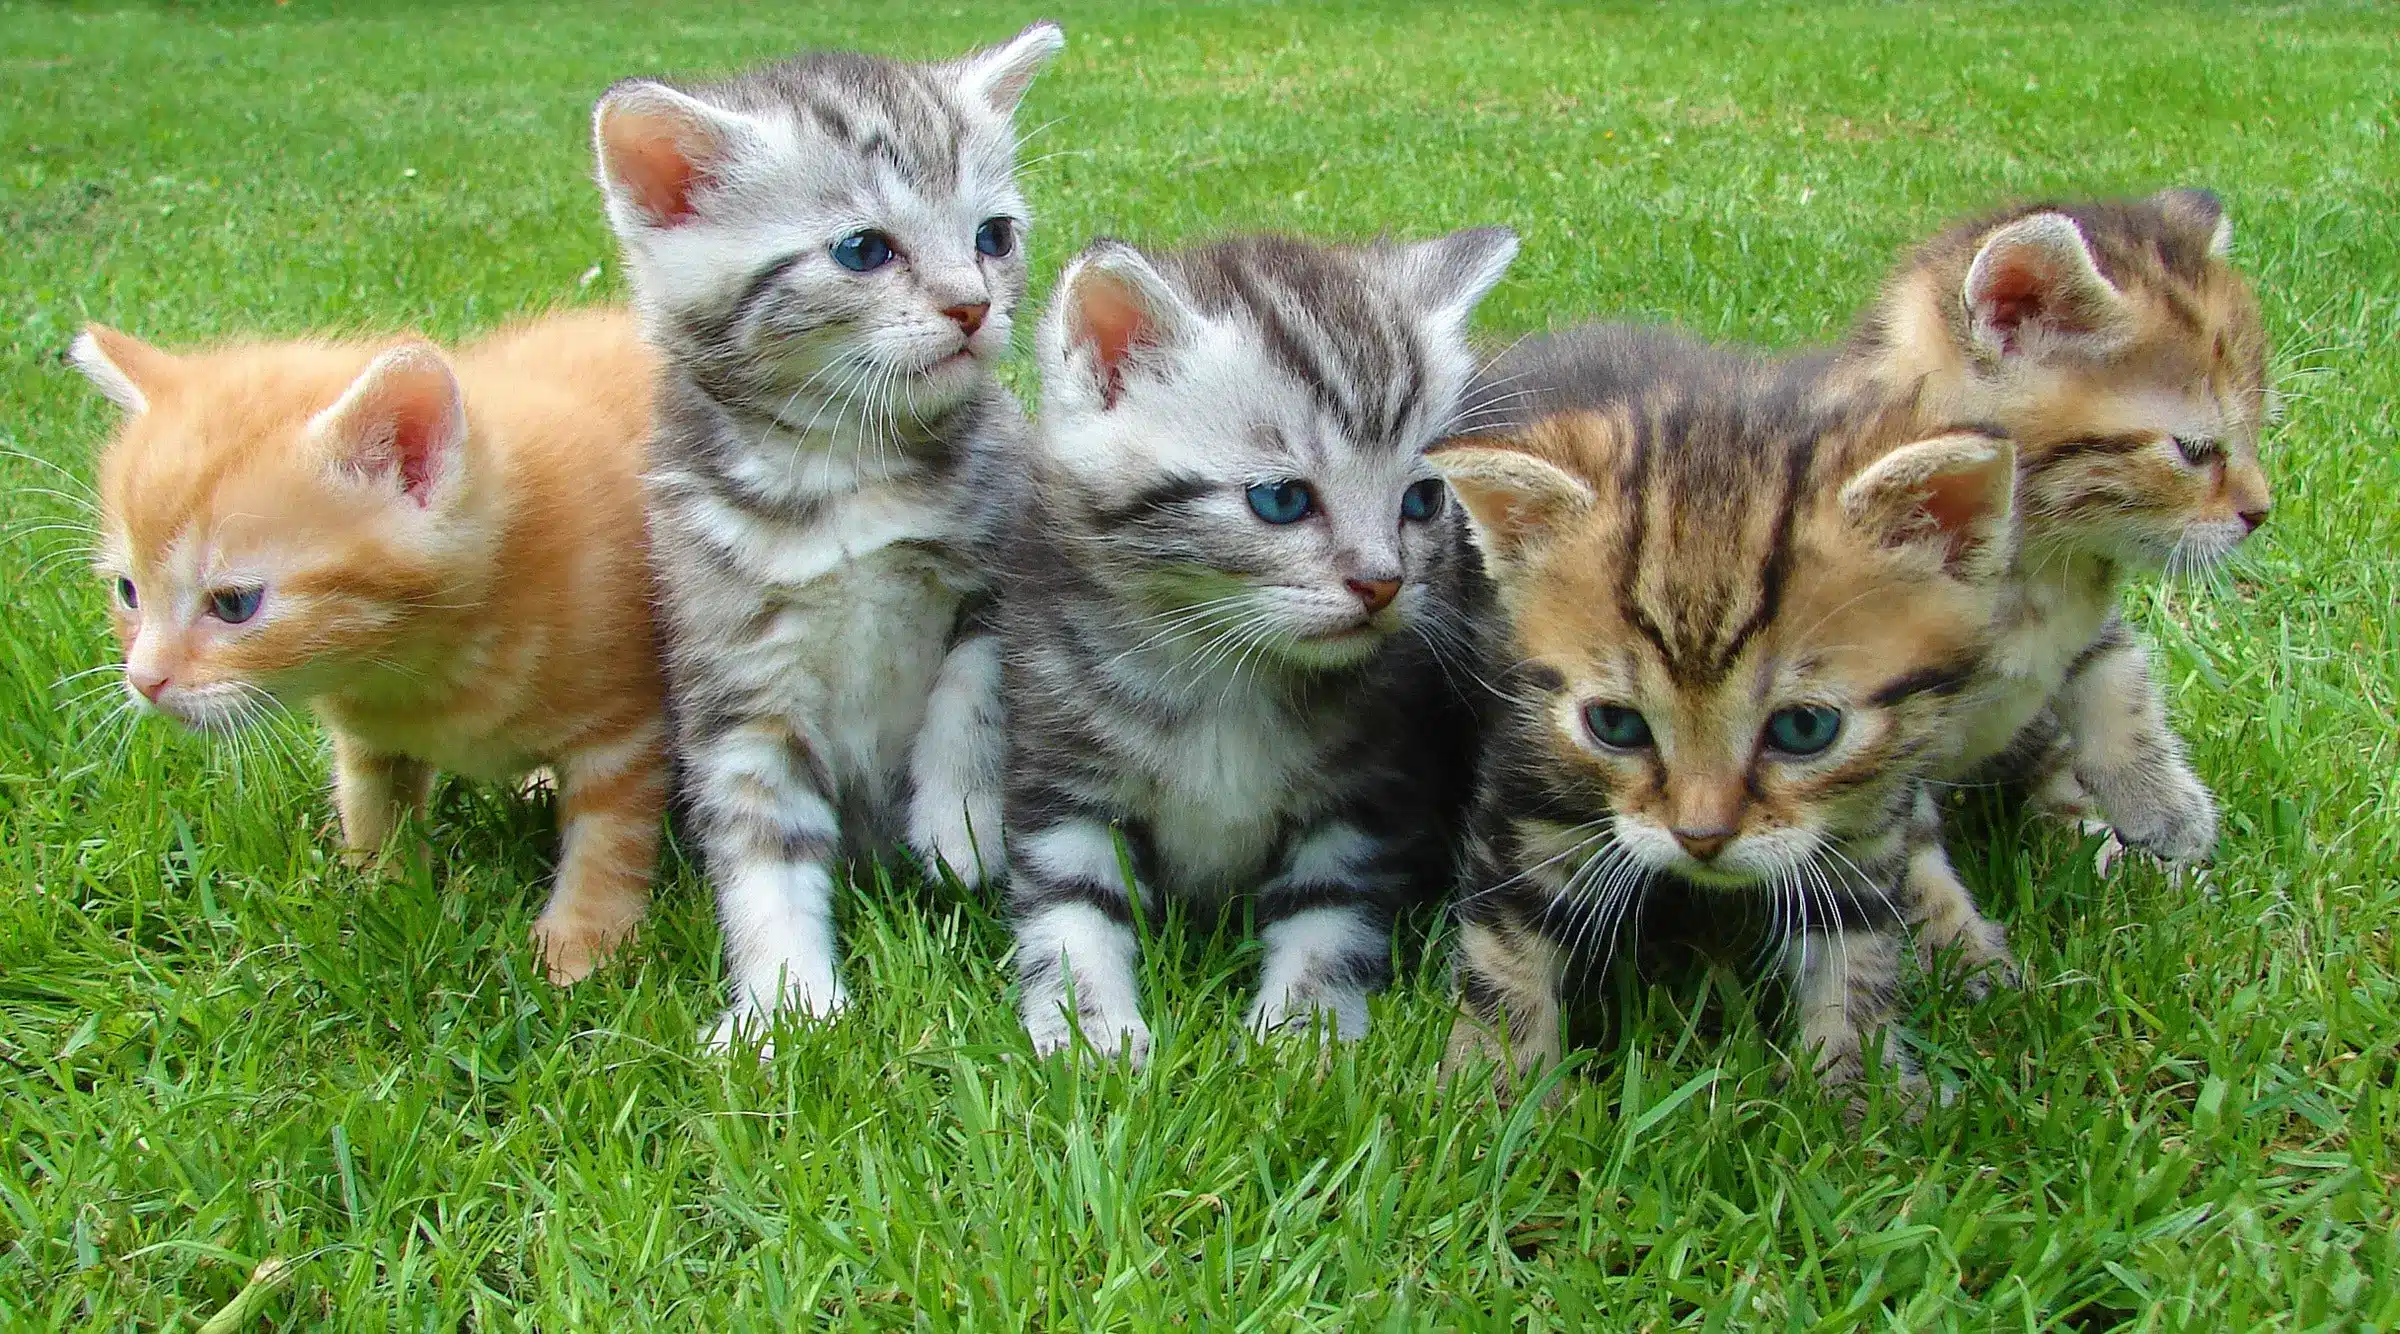 A group of kittens playing in the grass.